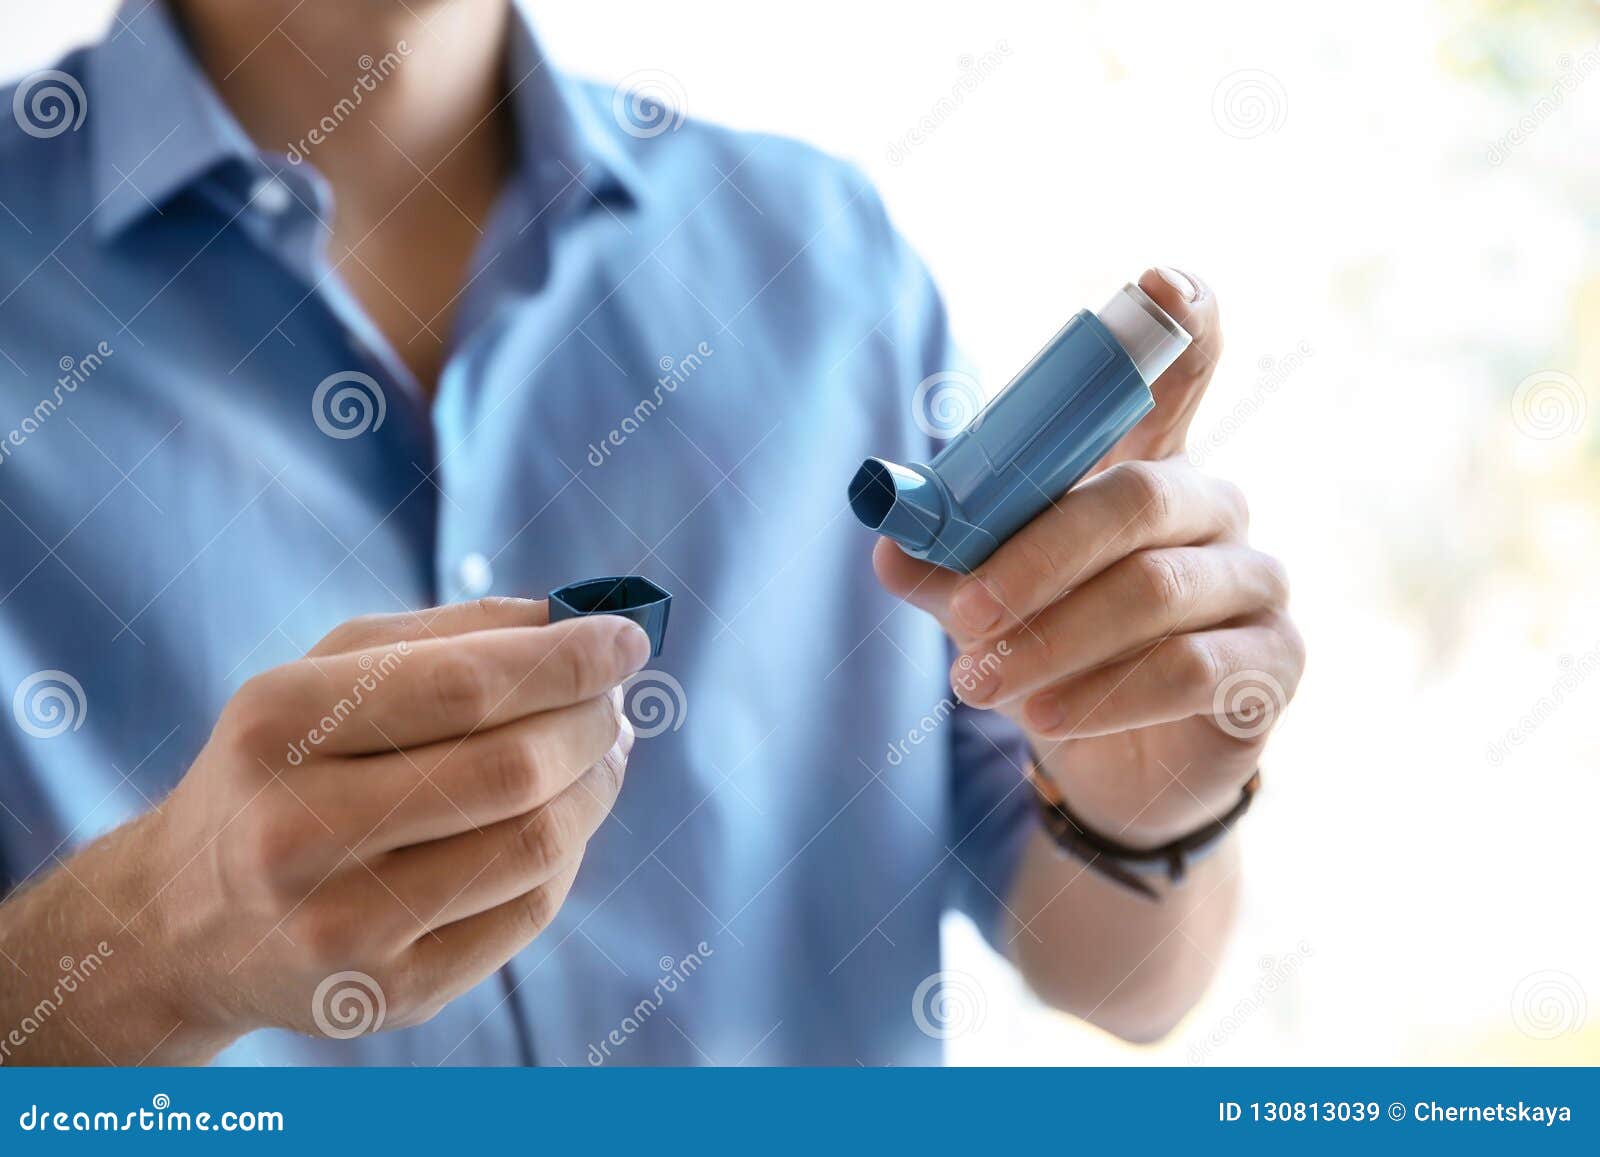 young man with asthma inhaler indoors